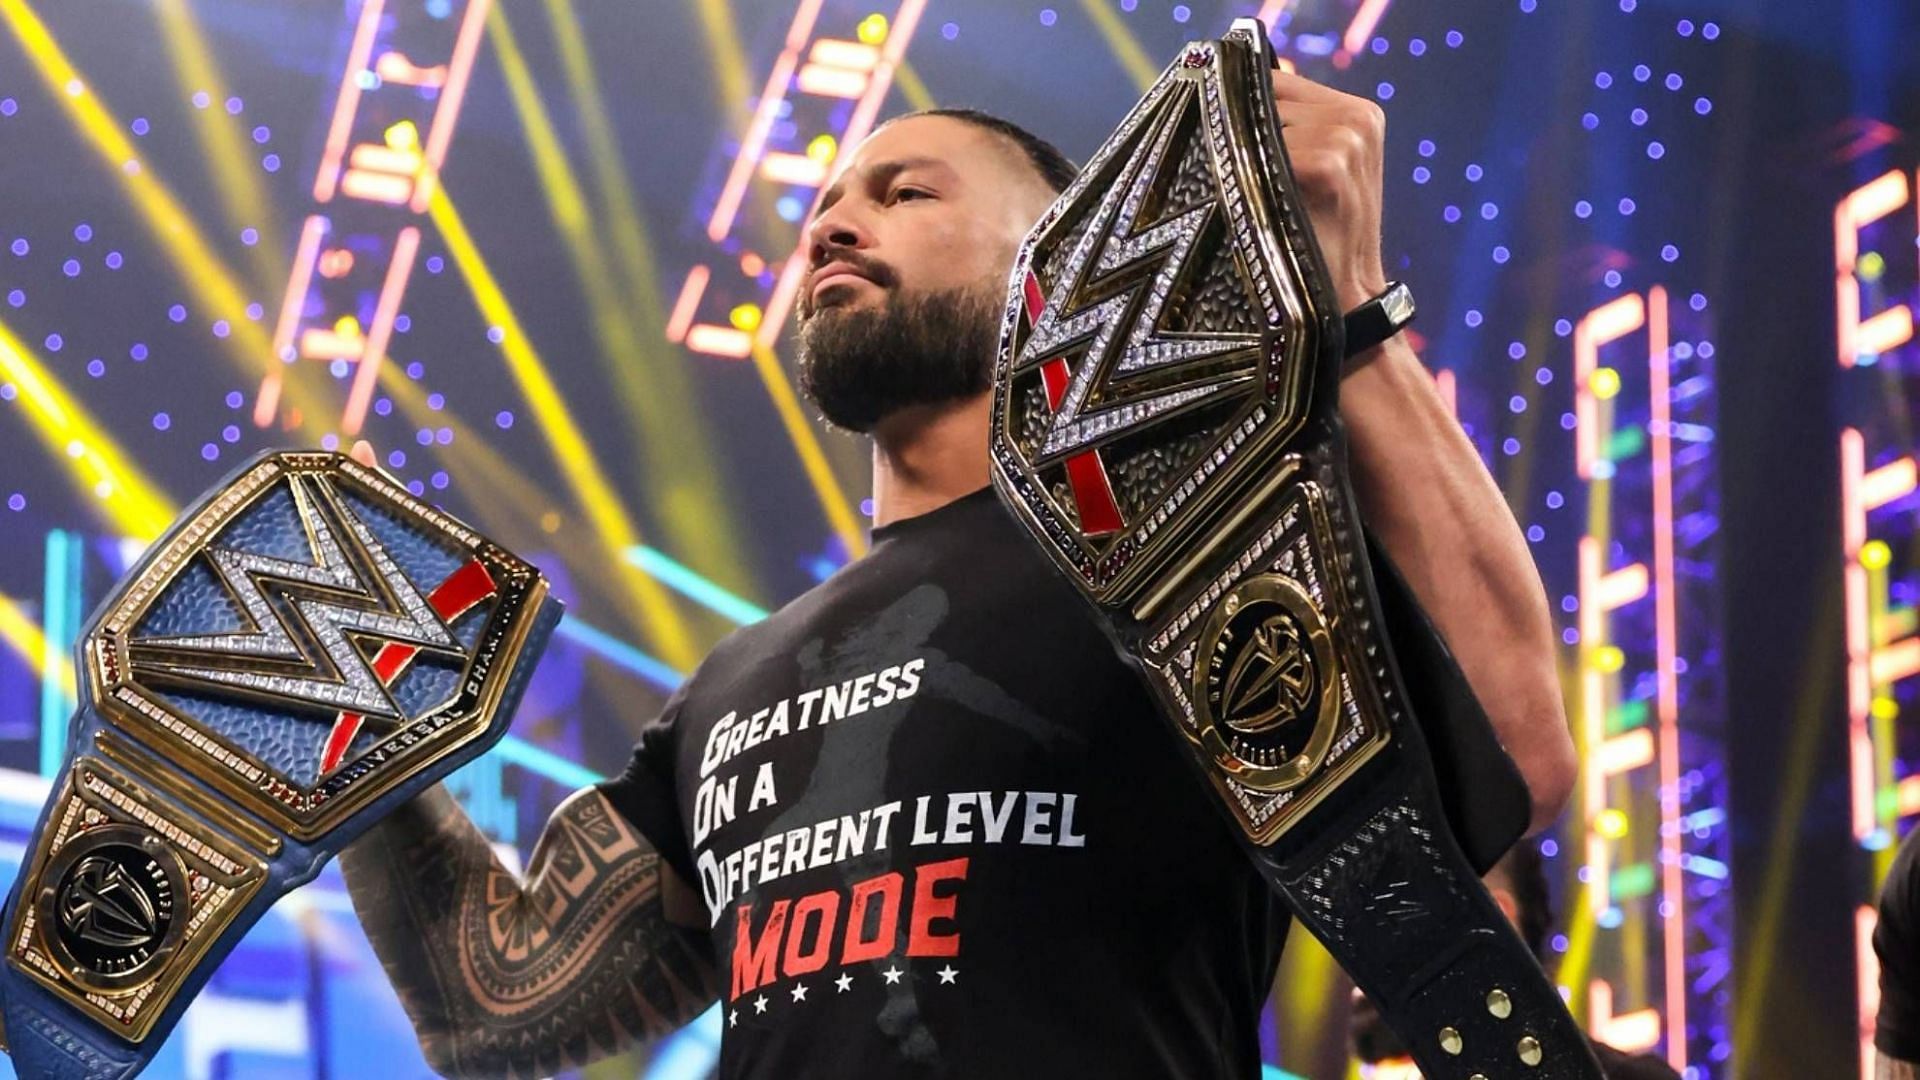 &quot;I&#039;m in God mode nowadays son&quot; - Roman Reigns, 2022